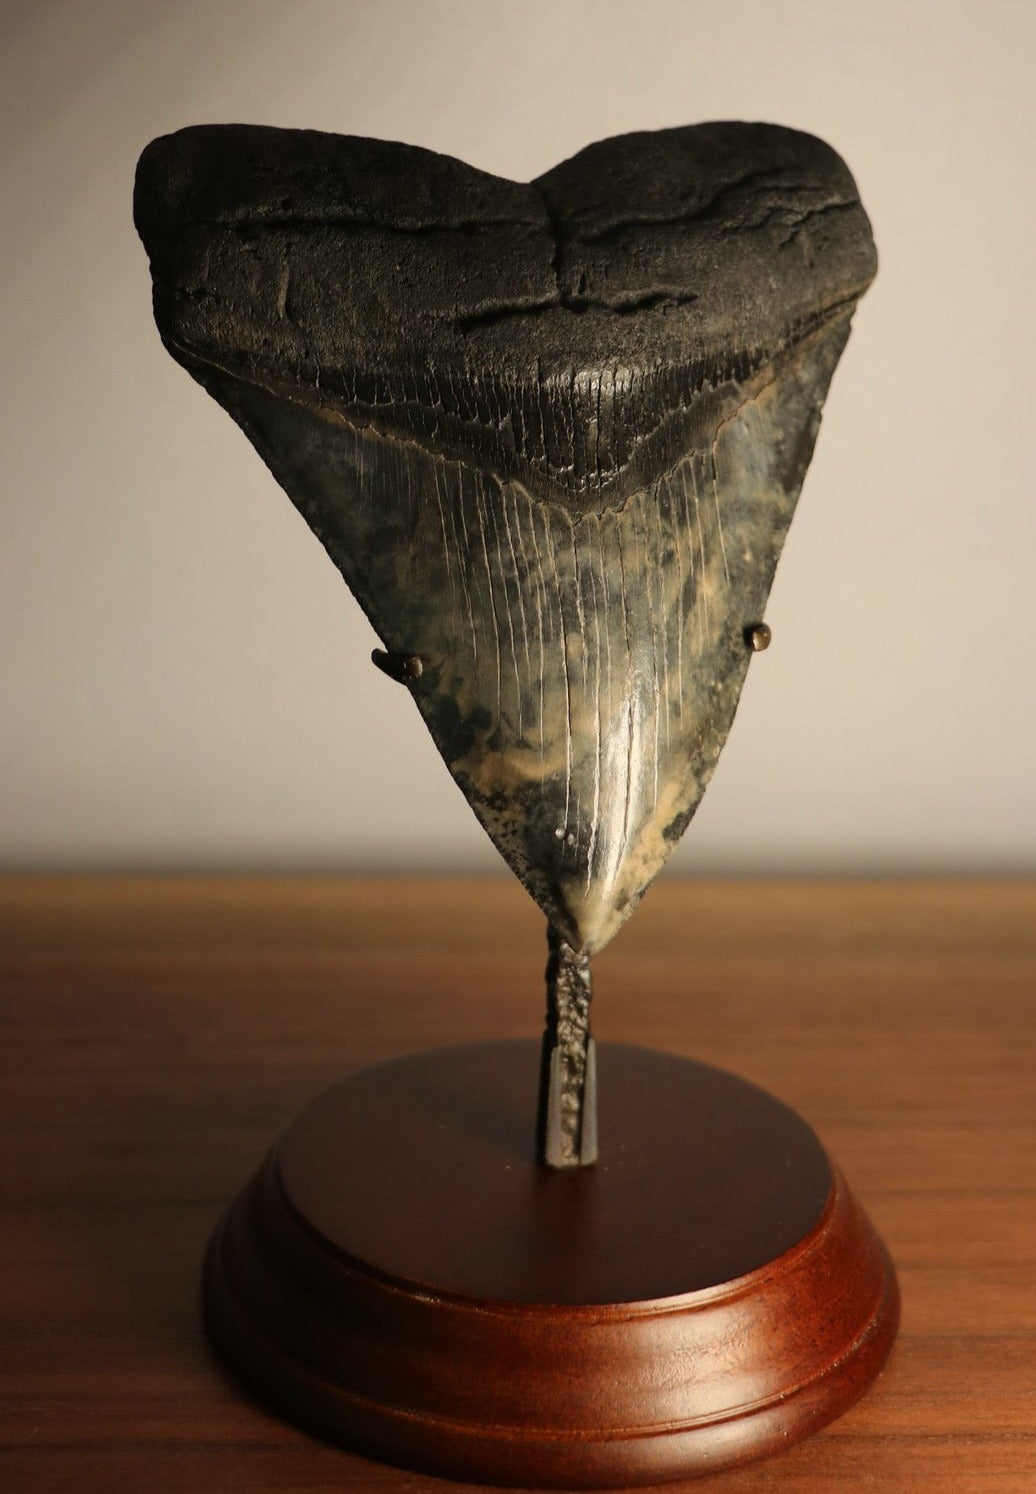 510 Inch Megalodon Shark Tooth For Sale Fossil Realm